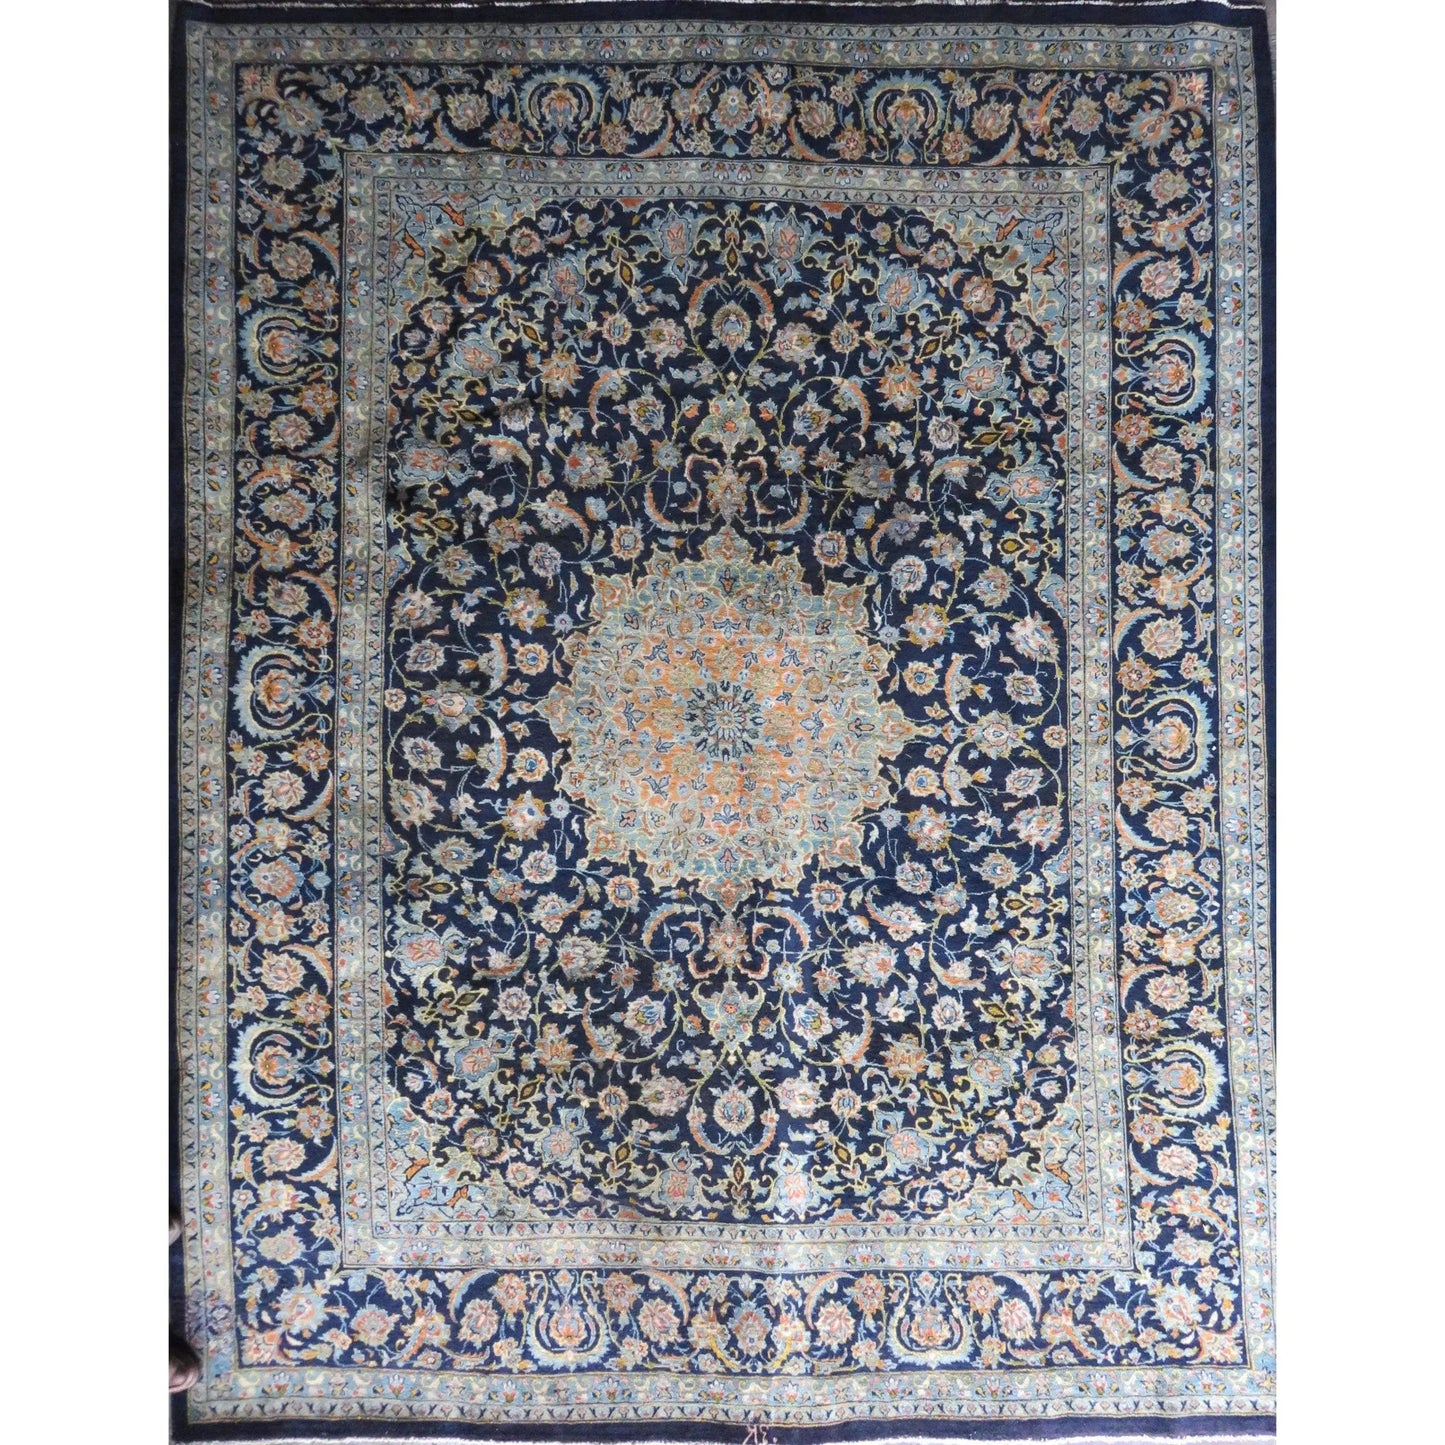 Hand-Knotted Persian Wool Rug – Luxurious Vintage Design, 12'5" X 9'10", Artisan Crafted, Perfect For Living Room